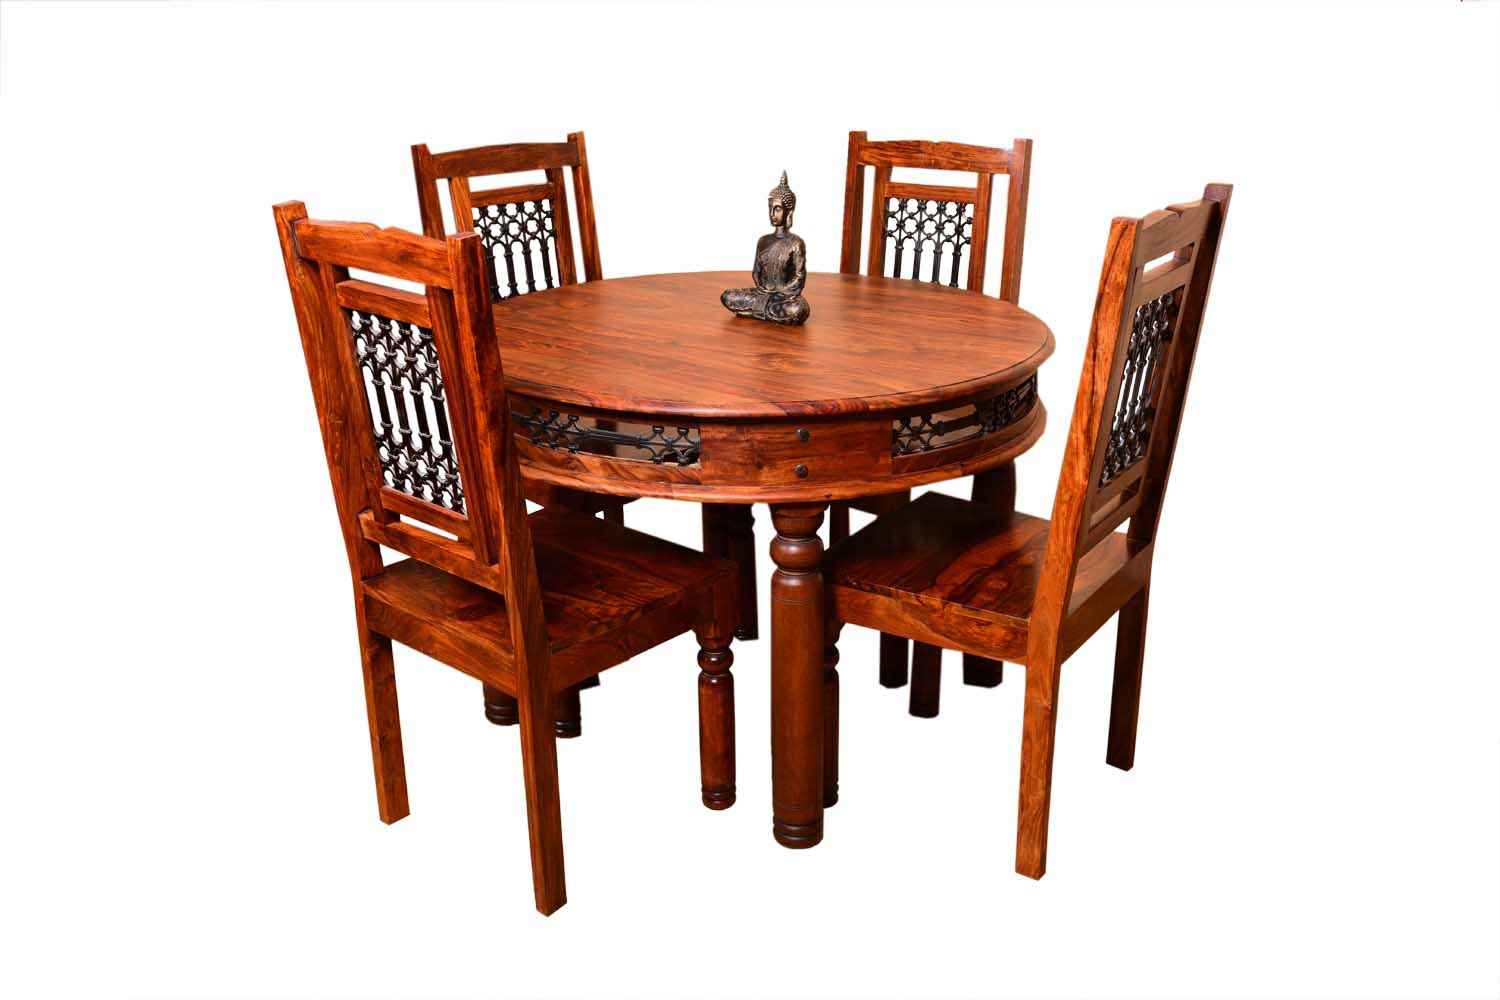 Buy 4 Seater Vintage Round Dining Table Set Dining Room 4 Seater Dining Table Sets Furniture